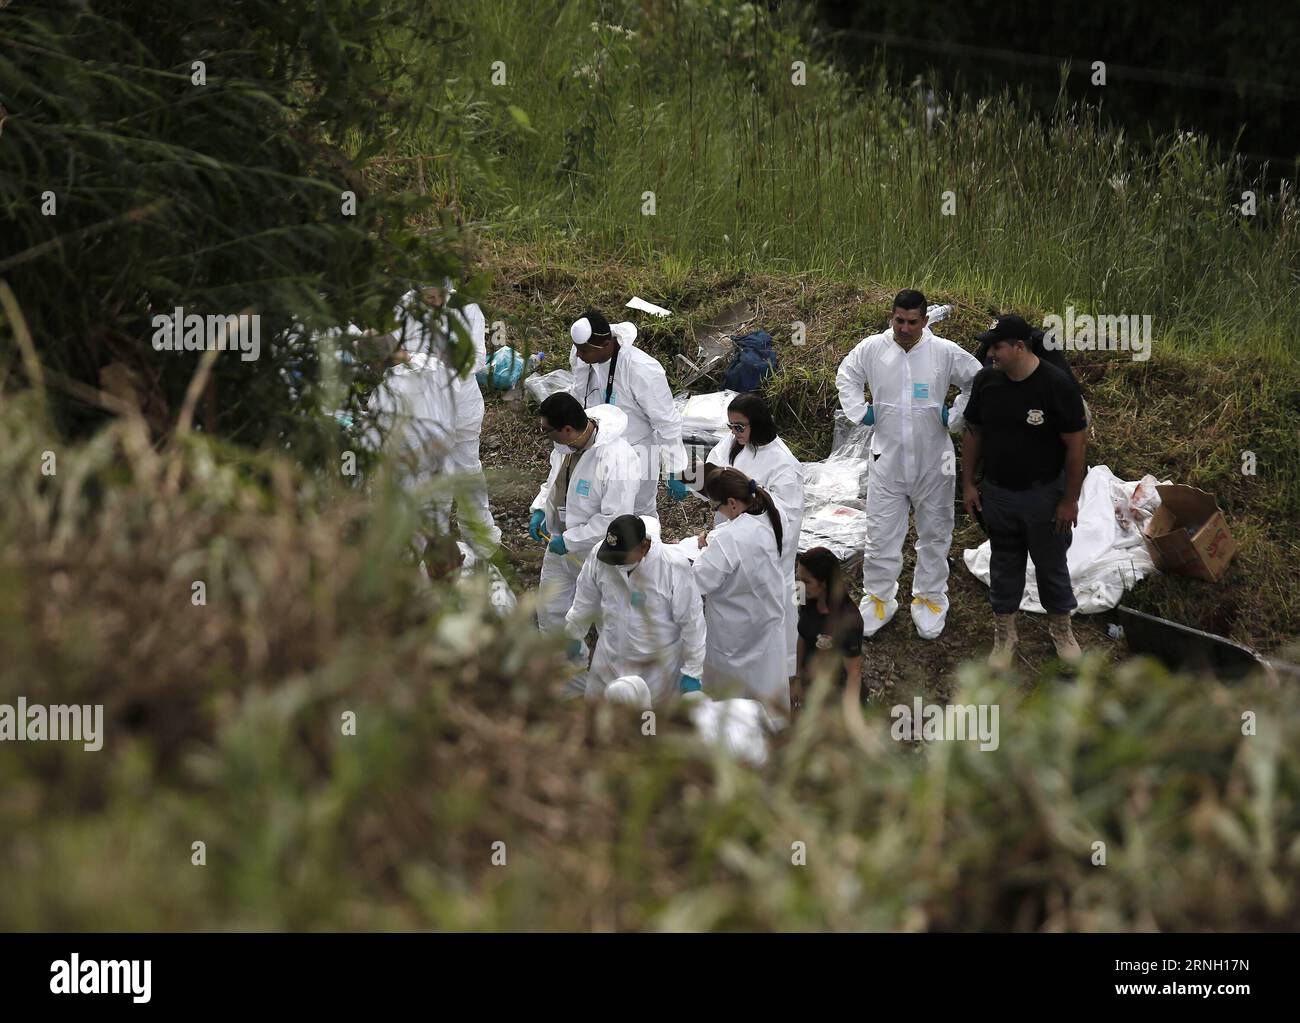 (161021) -- CINCHONA, Oct. 21, 2016 -- Officials work at the site where a bus fell off a 20-meter ditch near the town of Cinchona in the province of Alajuela, Costa Rica, on Oct. 20, 2016. At least 12 people were killed and 18 others injured in Costa Rica on Thursday when a bus carrying 30 tourists fell off a 20-meter ditch. Costa Rican President Luis Guillermo Solis declared three days of national mourning on Oct. 20-22, during which the national flag would be flown at half mast. Kent Gilbert) (fnc) (ce)(yy) COSTA RICA-CINCHONA-ACCIDENT-BUS e KENTxGILBERT PUBLICATIONxNOTxINxCHN   Cinchona OCT Stock Photo